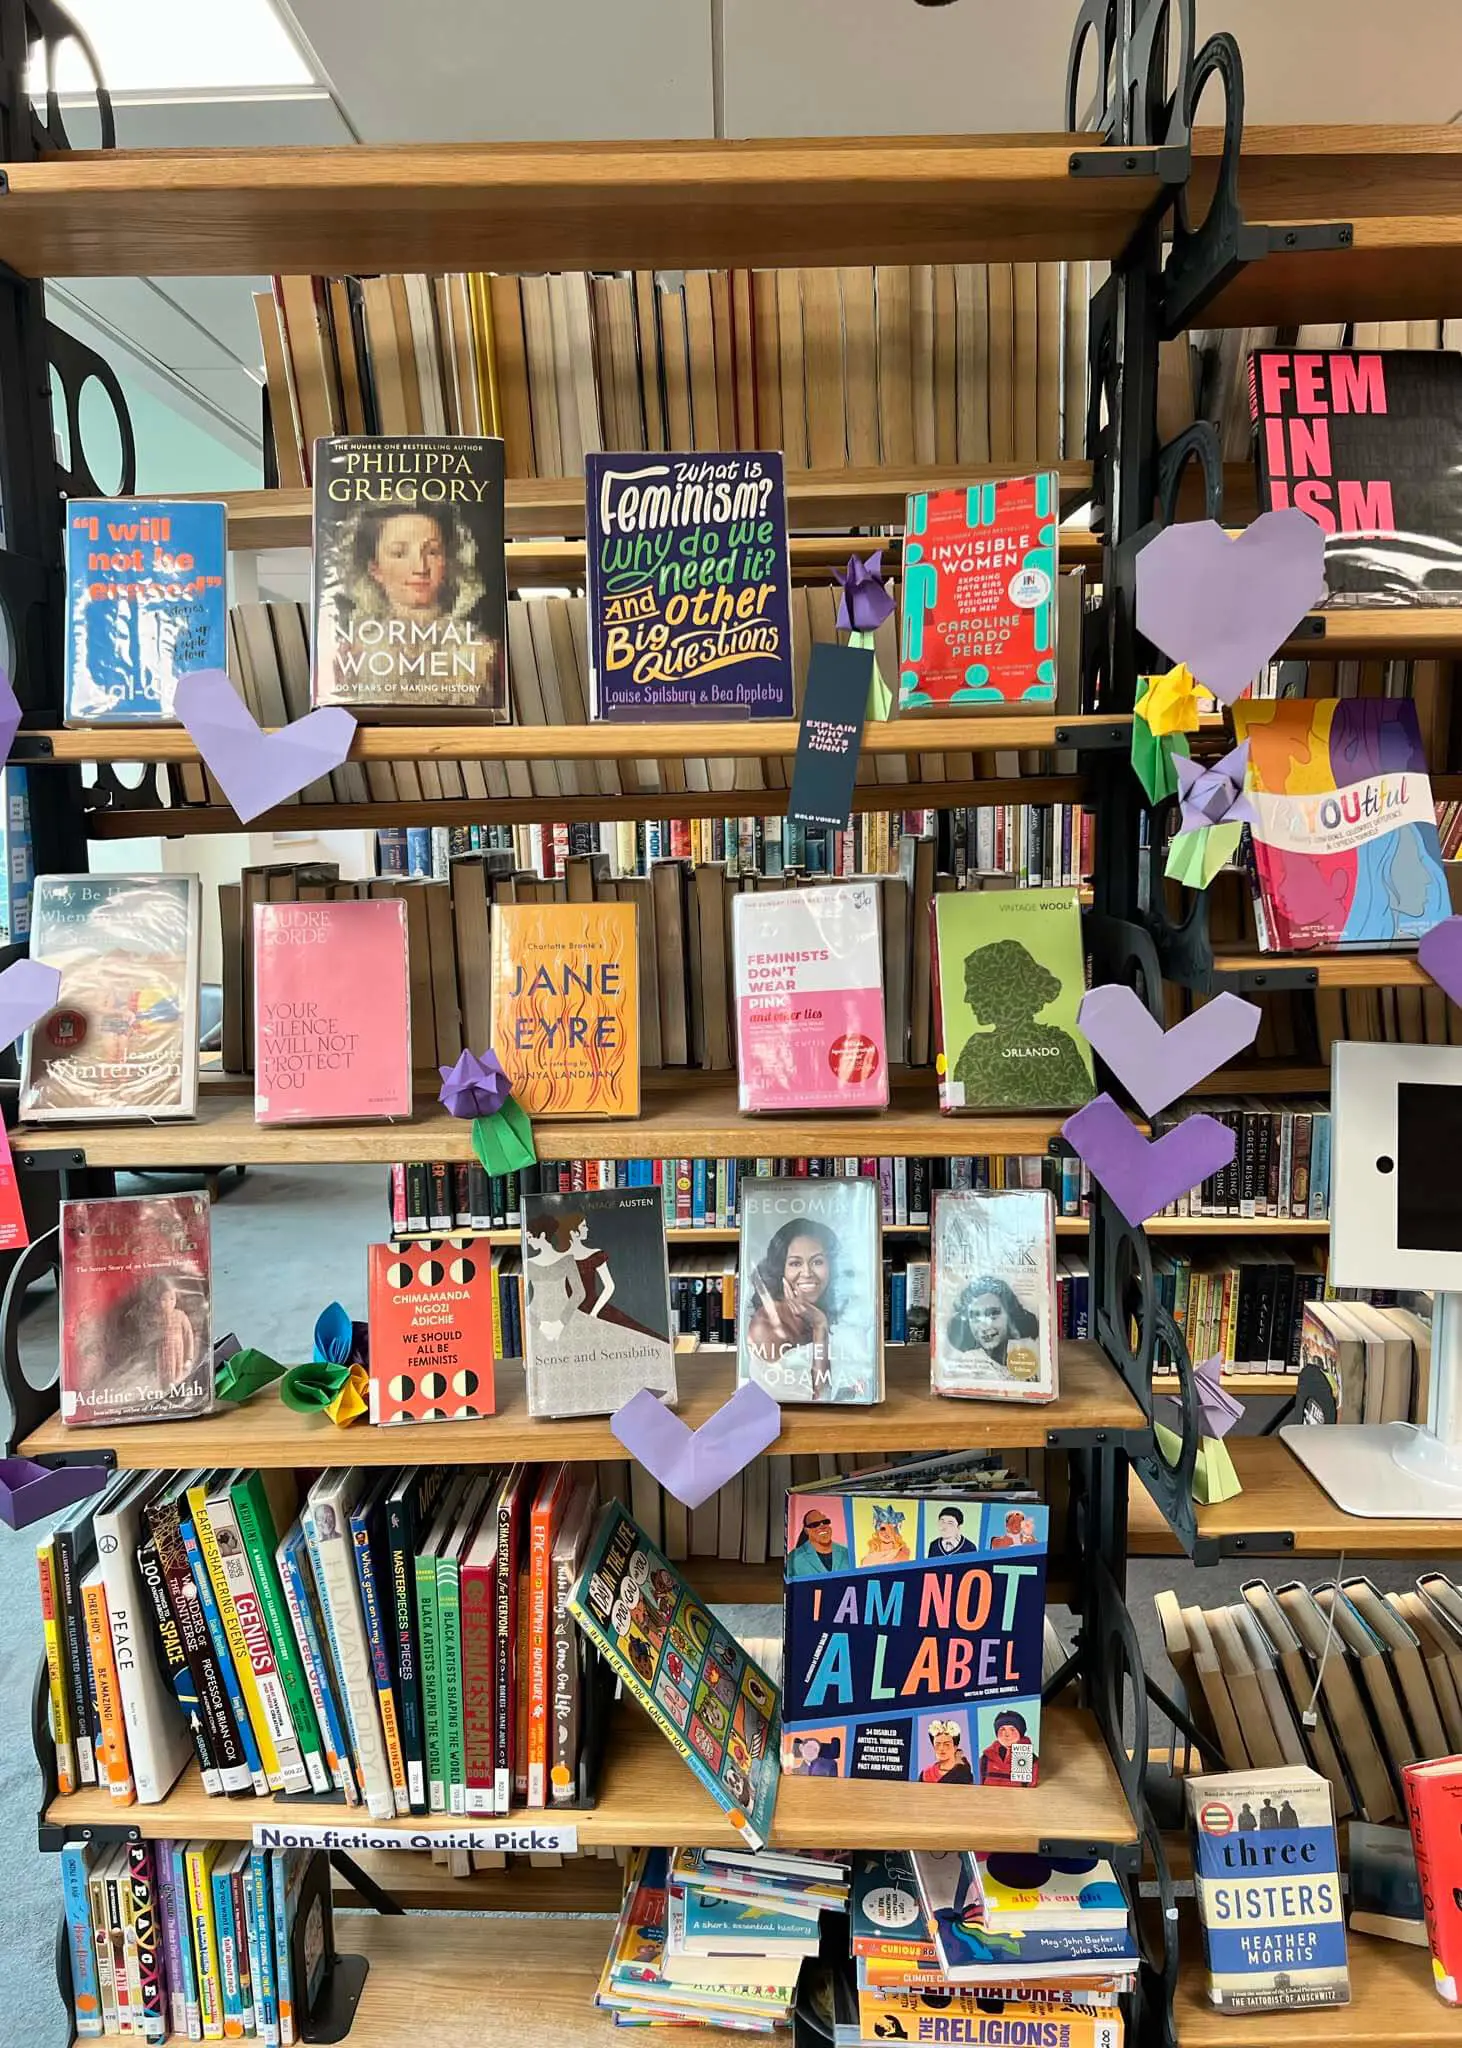 Women's Day book at the library for International Women's Day at Ibstock Place School, Roehampton, a private school near Richmond, Barnes, Putney, Kingston, & Wandsworth